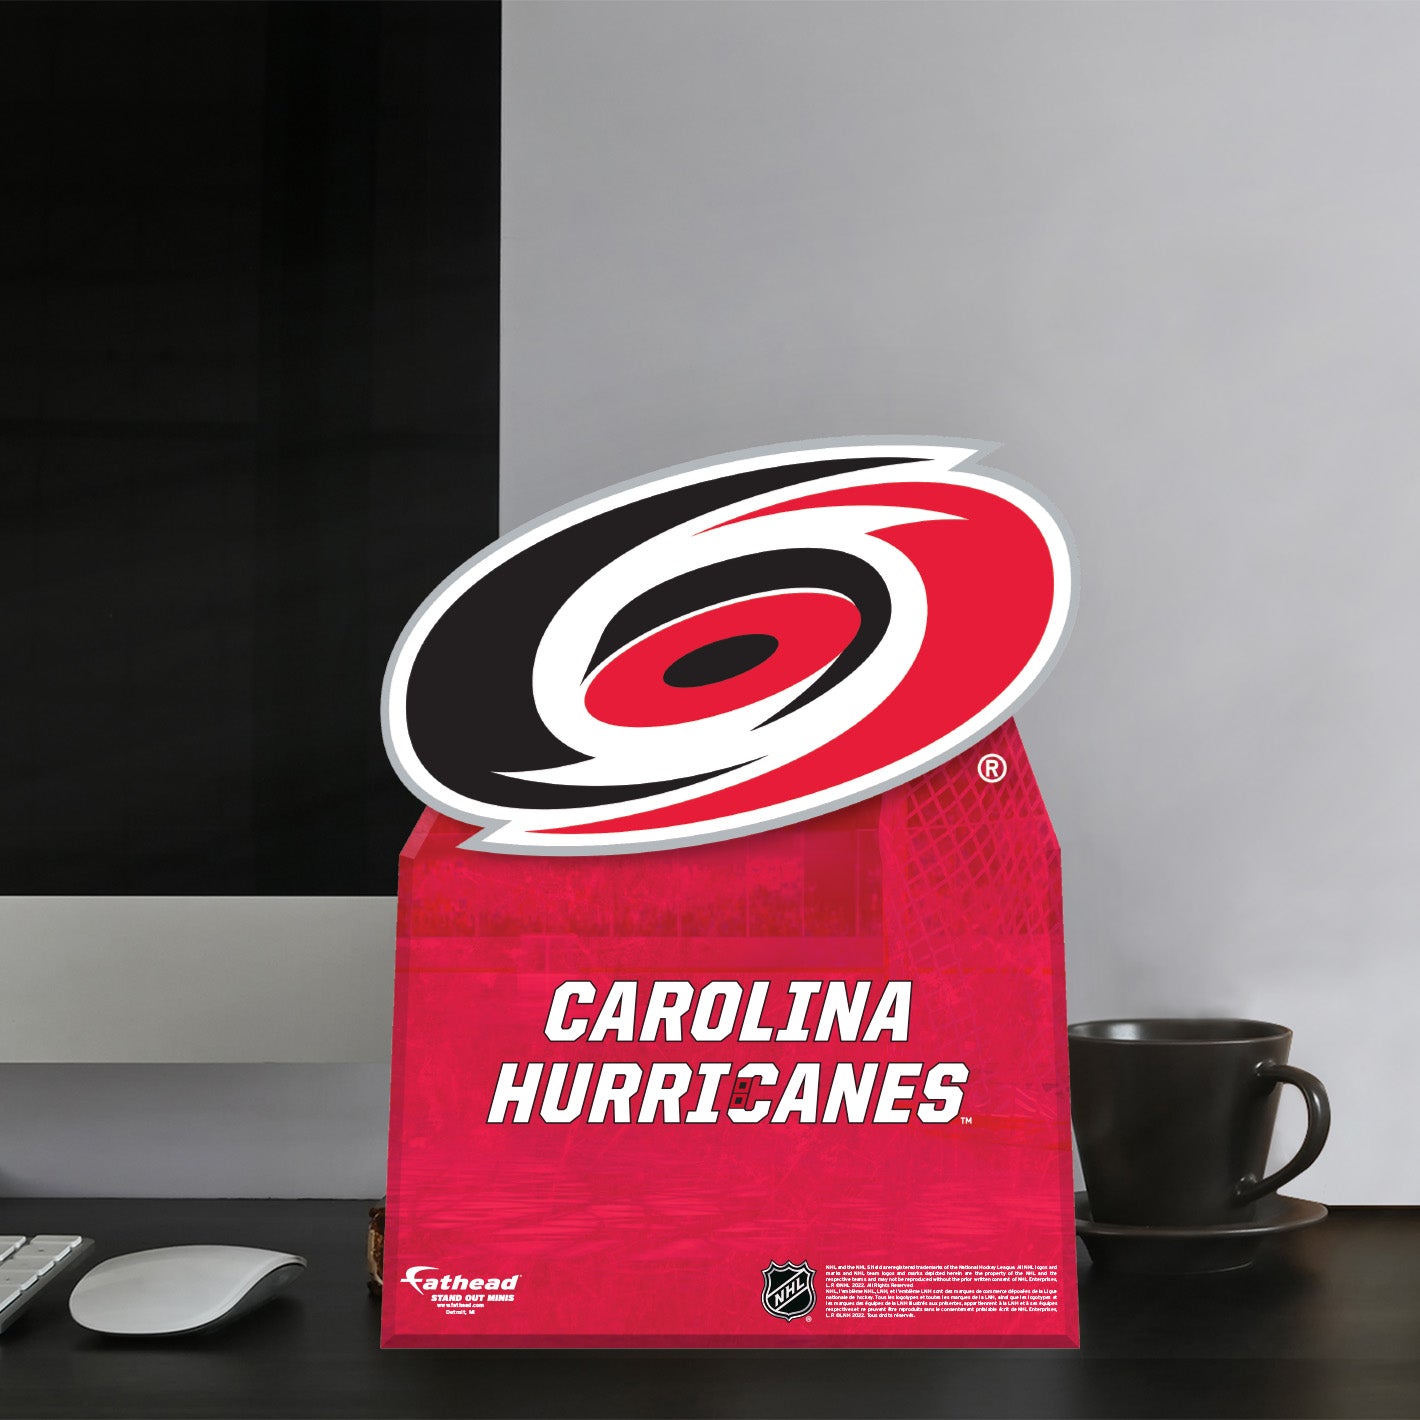 Carolina Hurricanes:   Logo Stand Out Mini   Cardstock Cutout  - Officially Licensed NHL    Stand Out